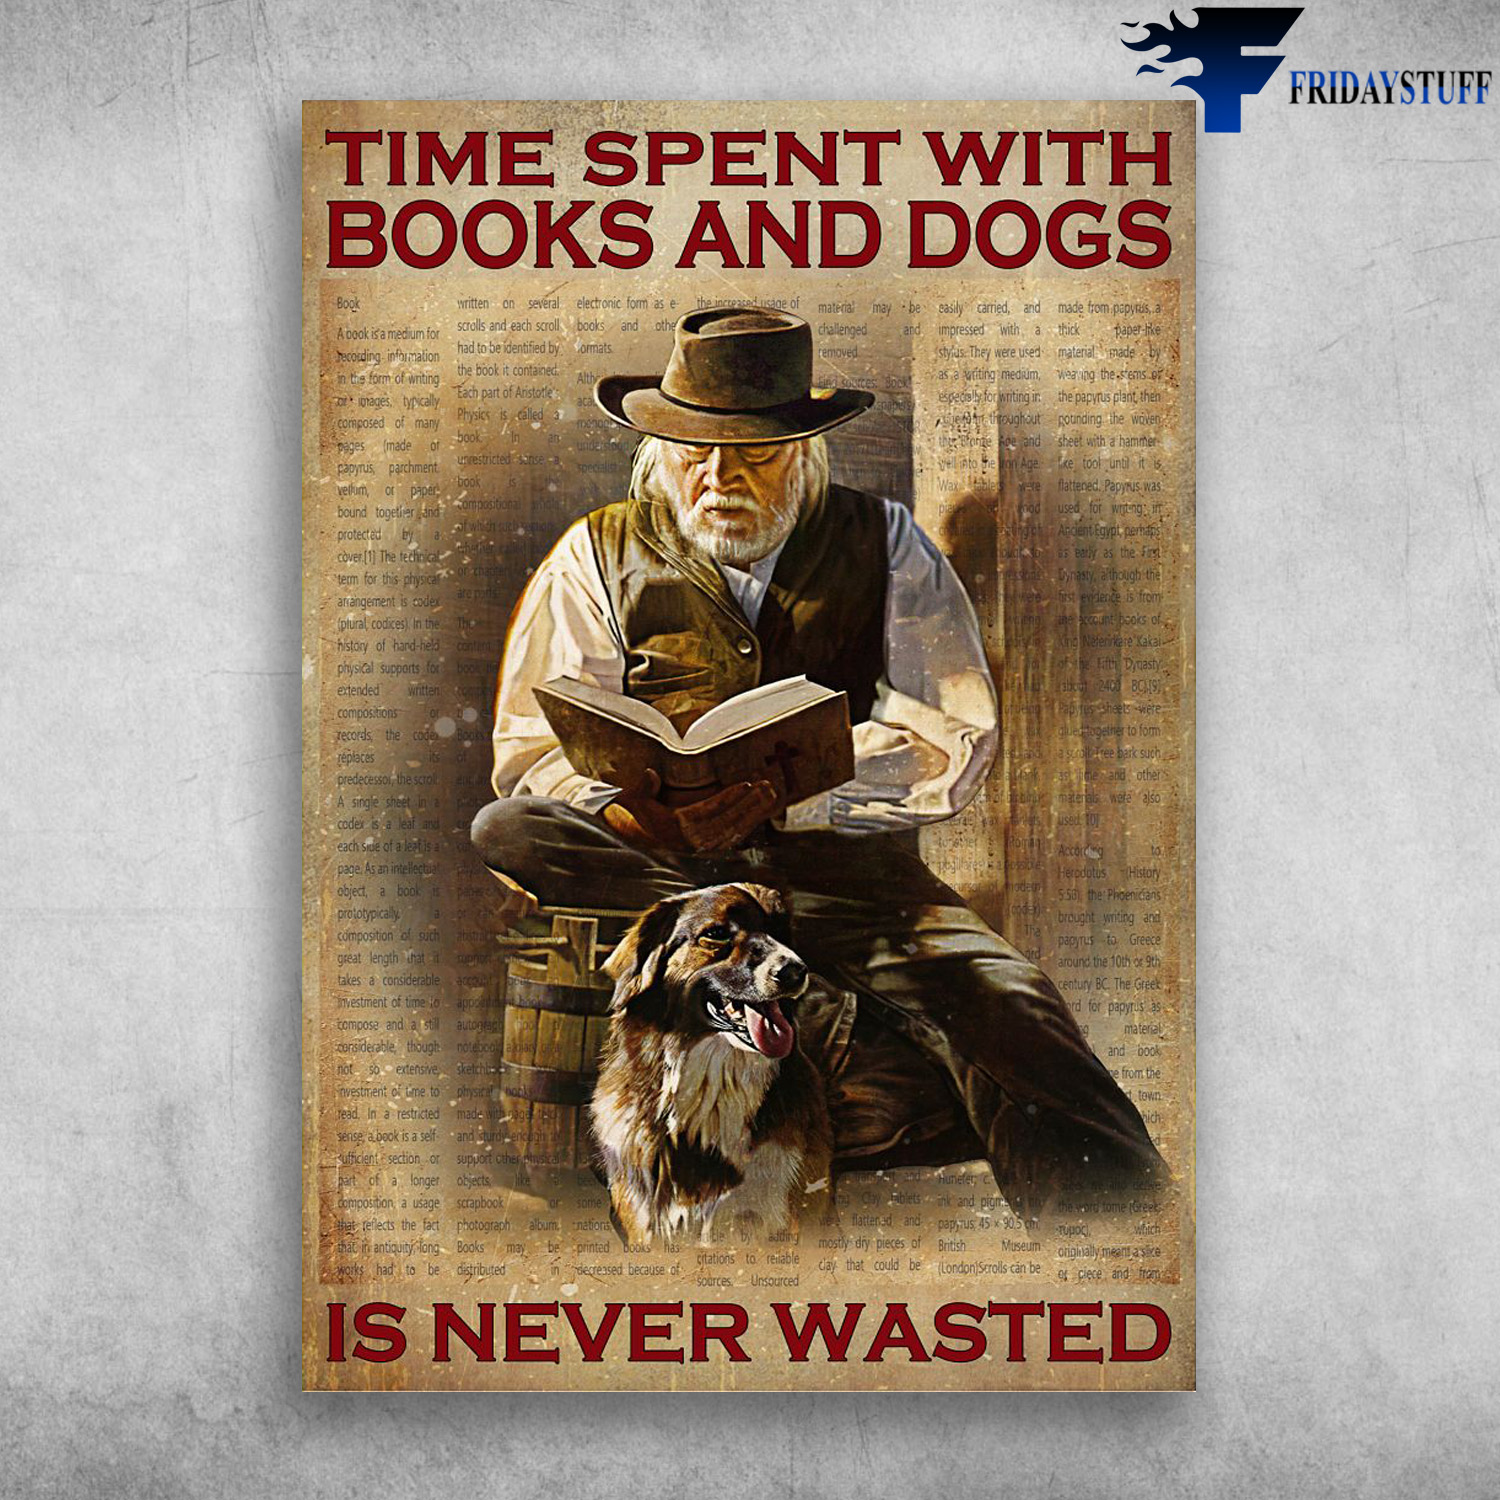 Old Cowboy, Reading Book, Dog Lover - TIme Spent With Books And Dogs, Is Never Wasted